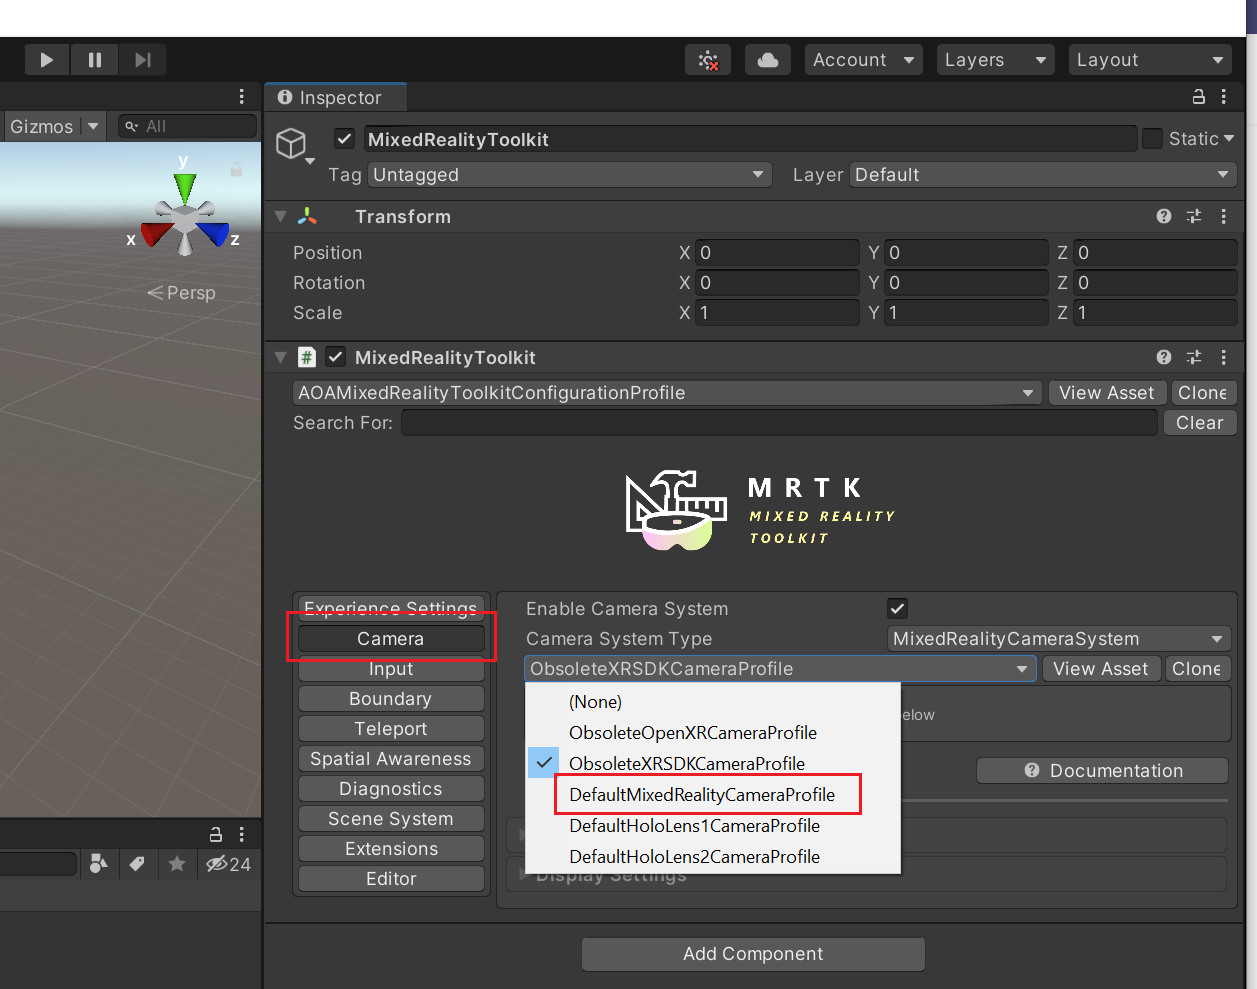 Screenshot shows the Unity Editor with Camera and DefaultMixedRealityCameraProfile highlighted.